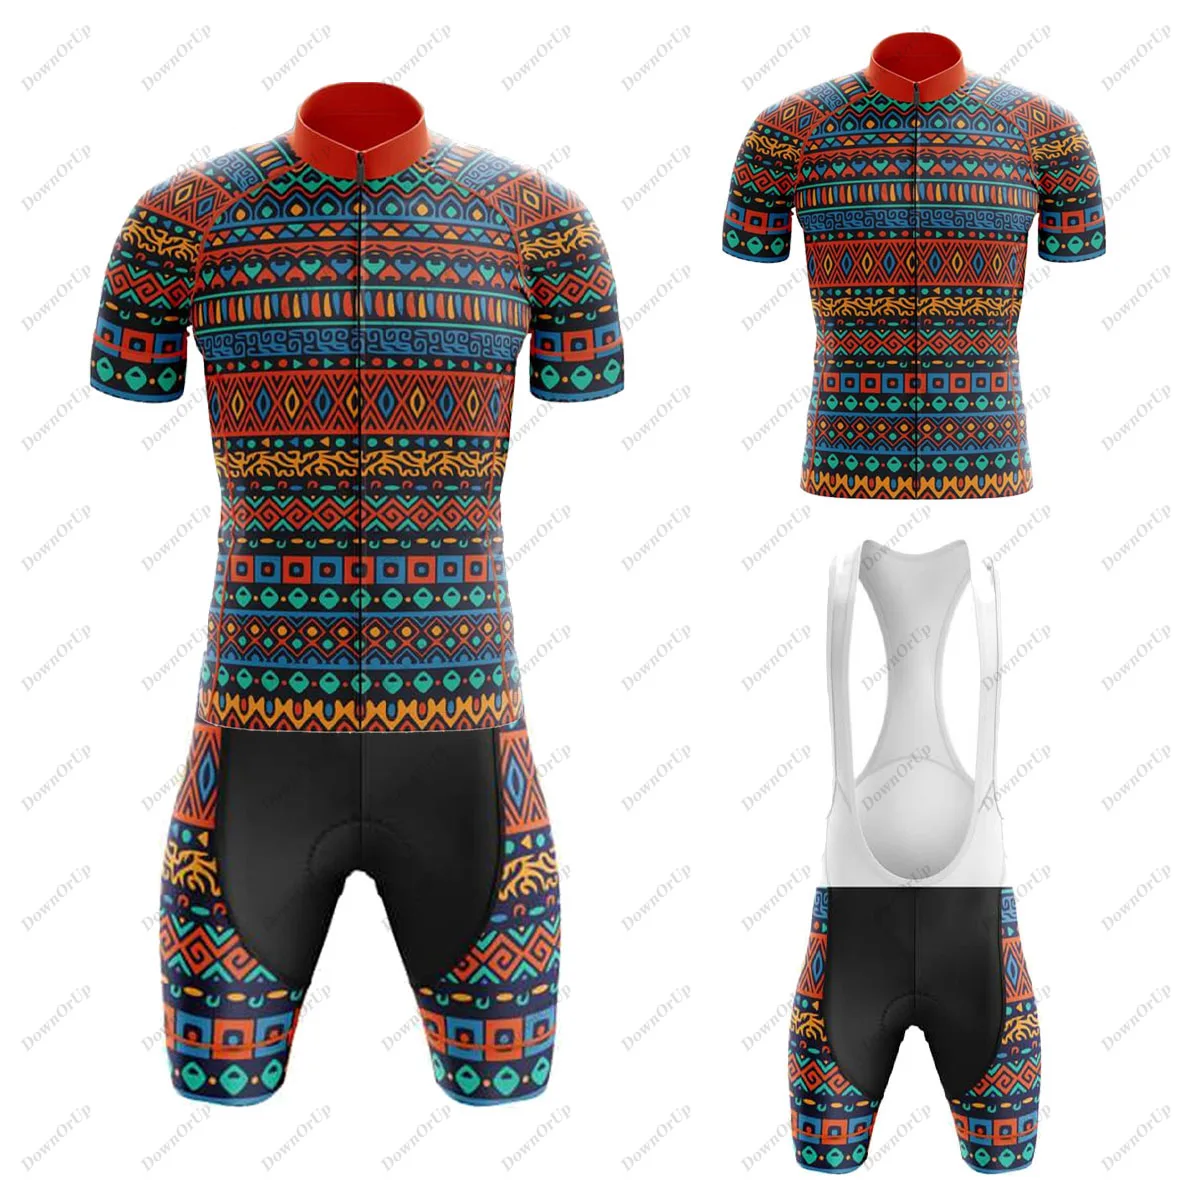 

Native Summer Men's Cycling Jerse Set Breathable Cycling Jersey Bib Shorts MTB Bicycle Uniform Can Customized Bike Team